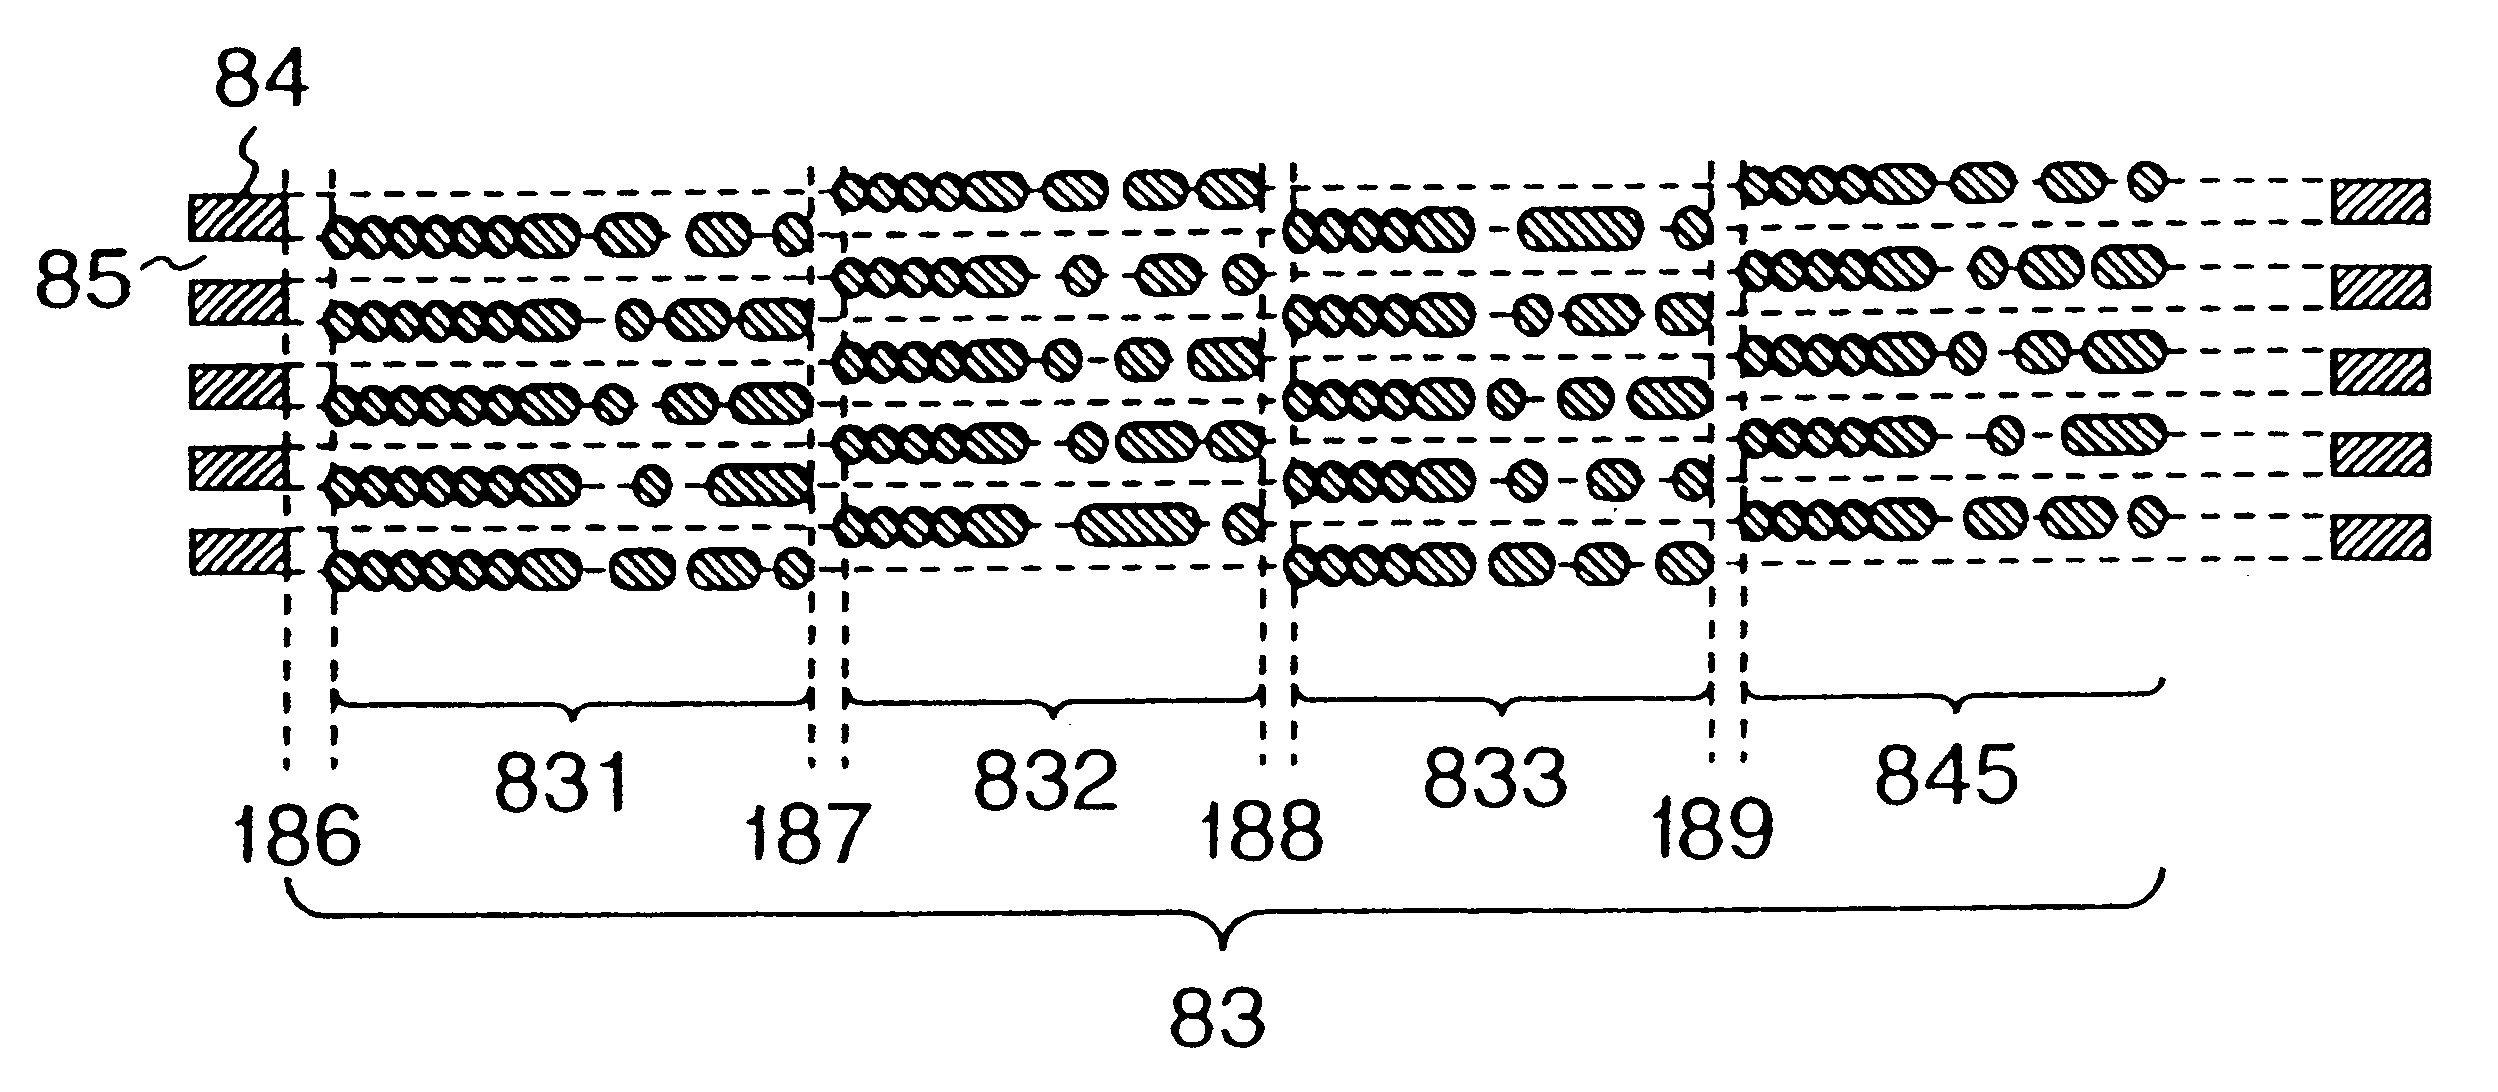 Optical reproducing method for optical medium with aligned prepit portion